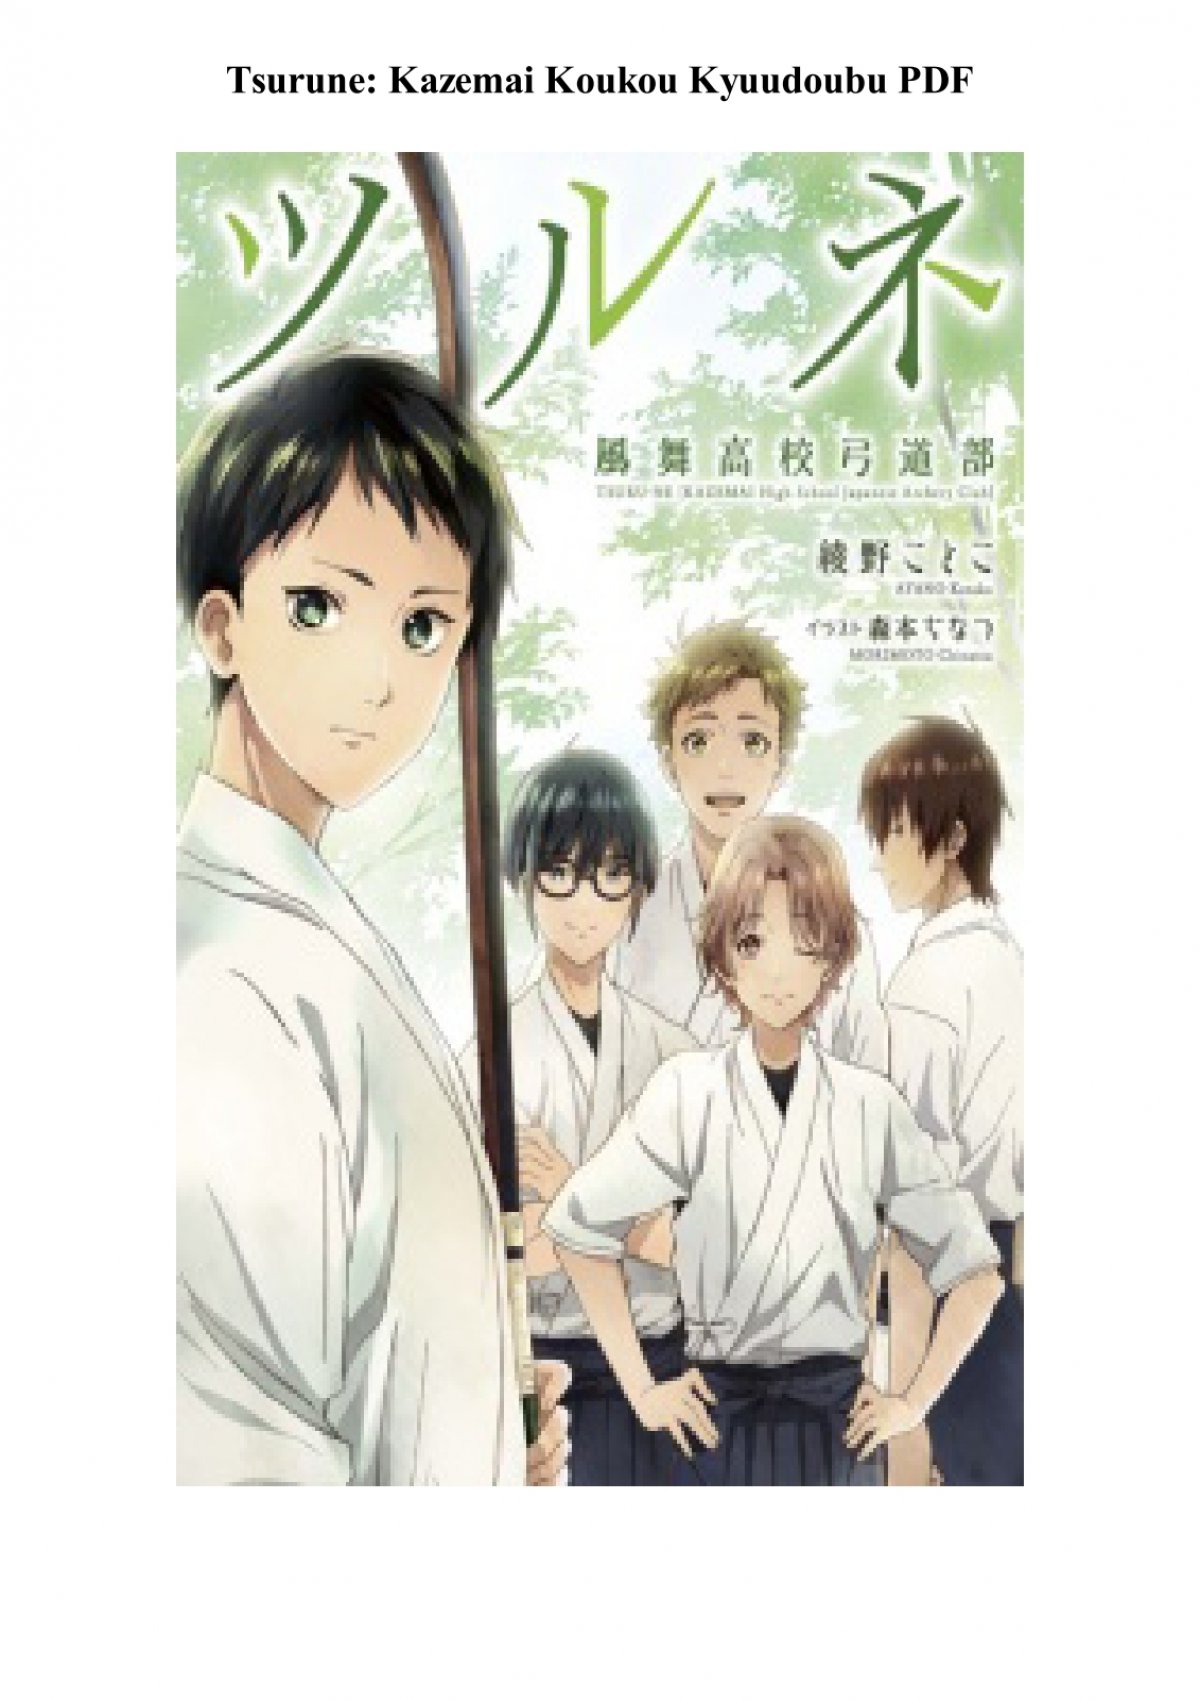 tsurune book 3!?!? — Tsurune Book 2 Chapter 2-One over f (Part 1)